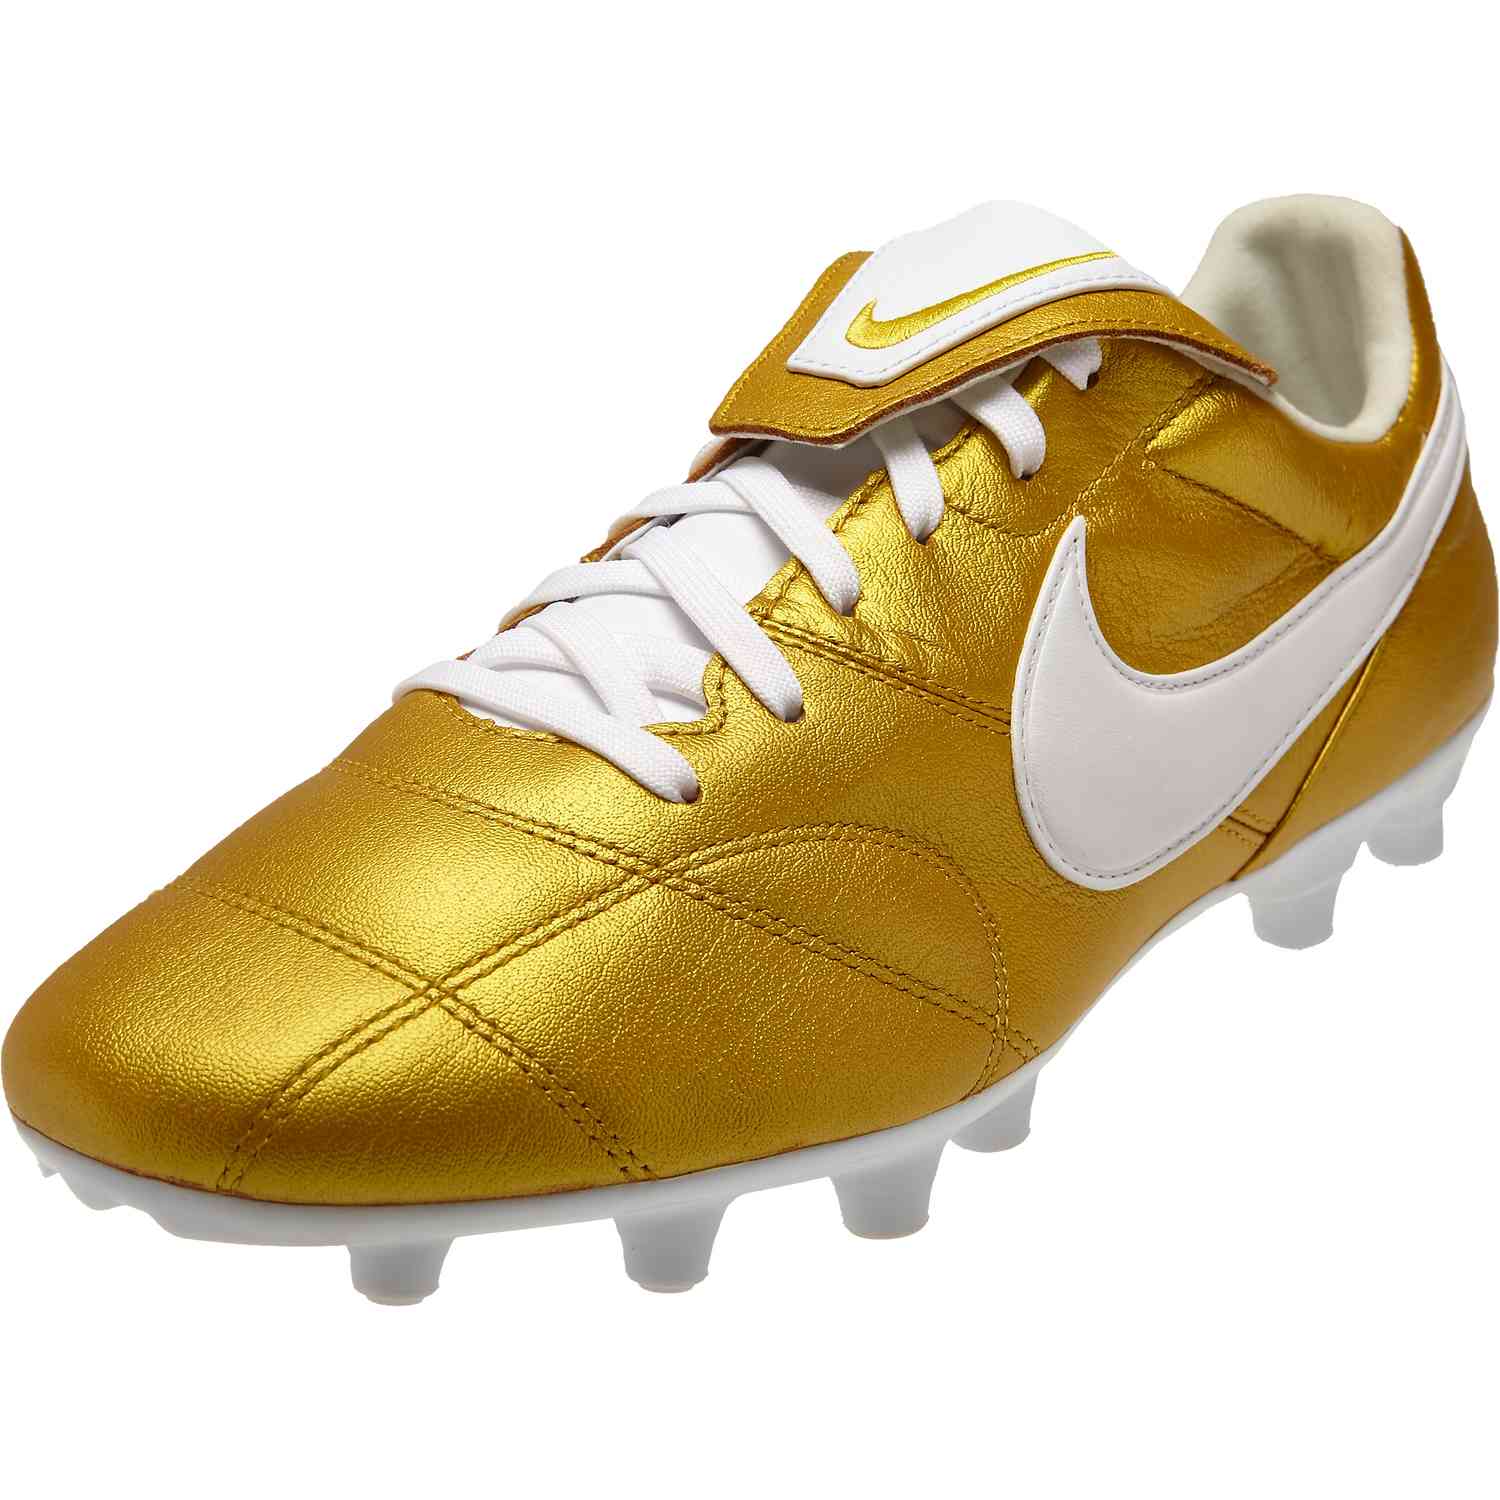 nike cleats white and gold